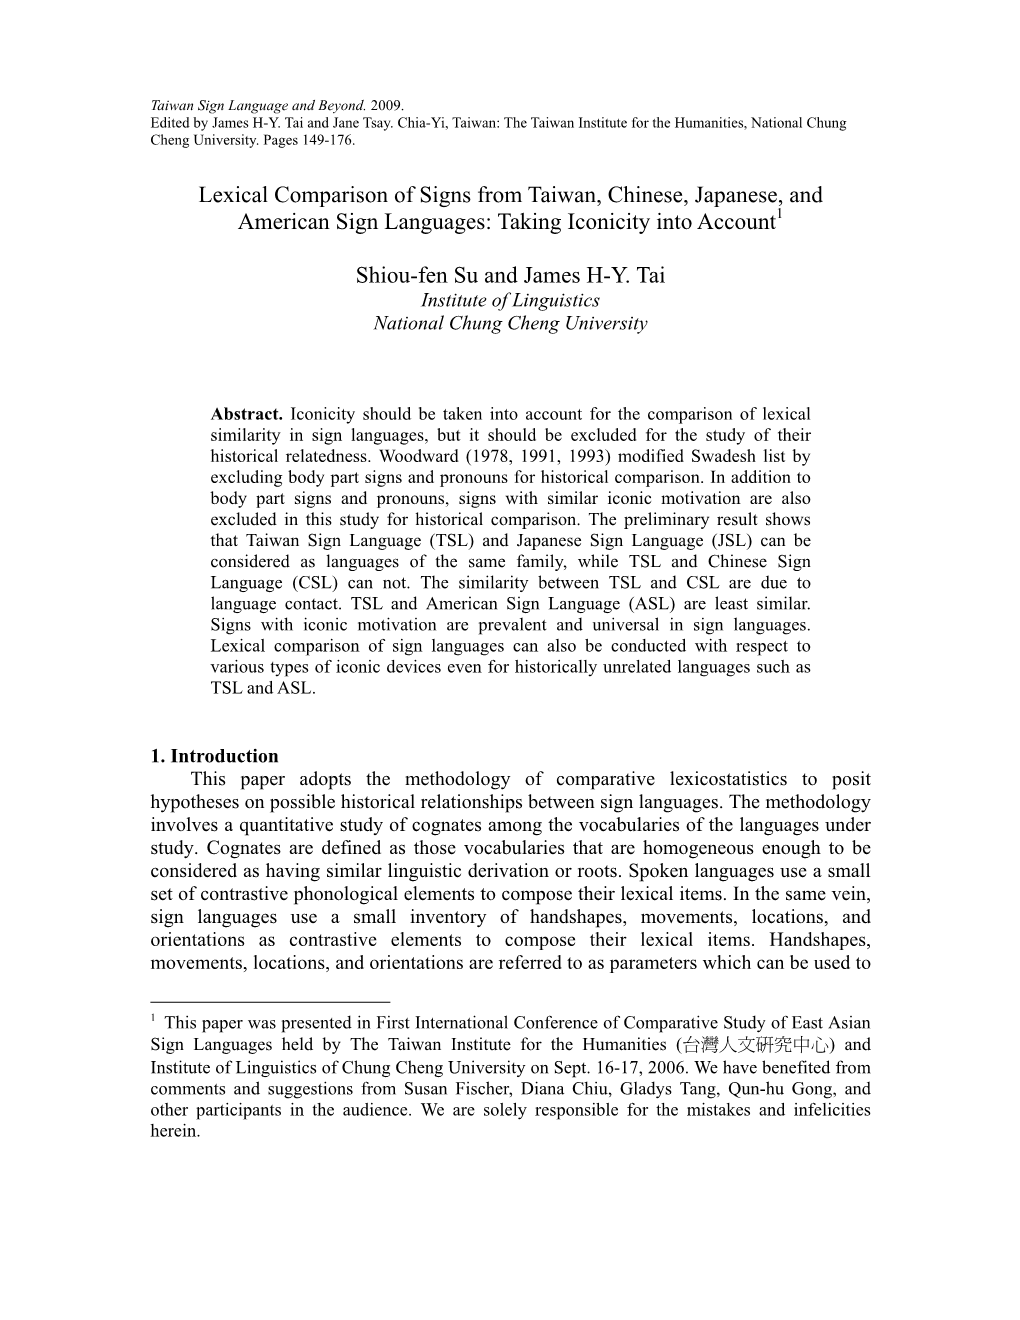 Lexical Comparison of Signs from Taiwan, Chinese, Japanese, and American Sign Languages: Taking Iconicity Into Account1